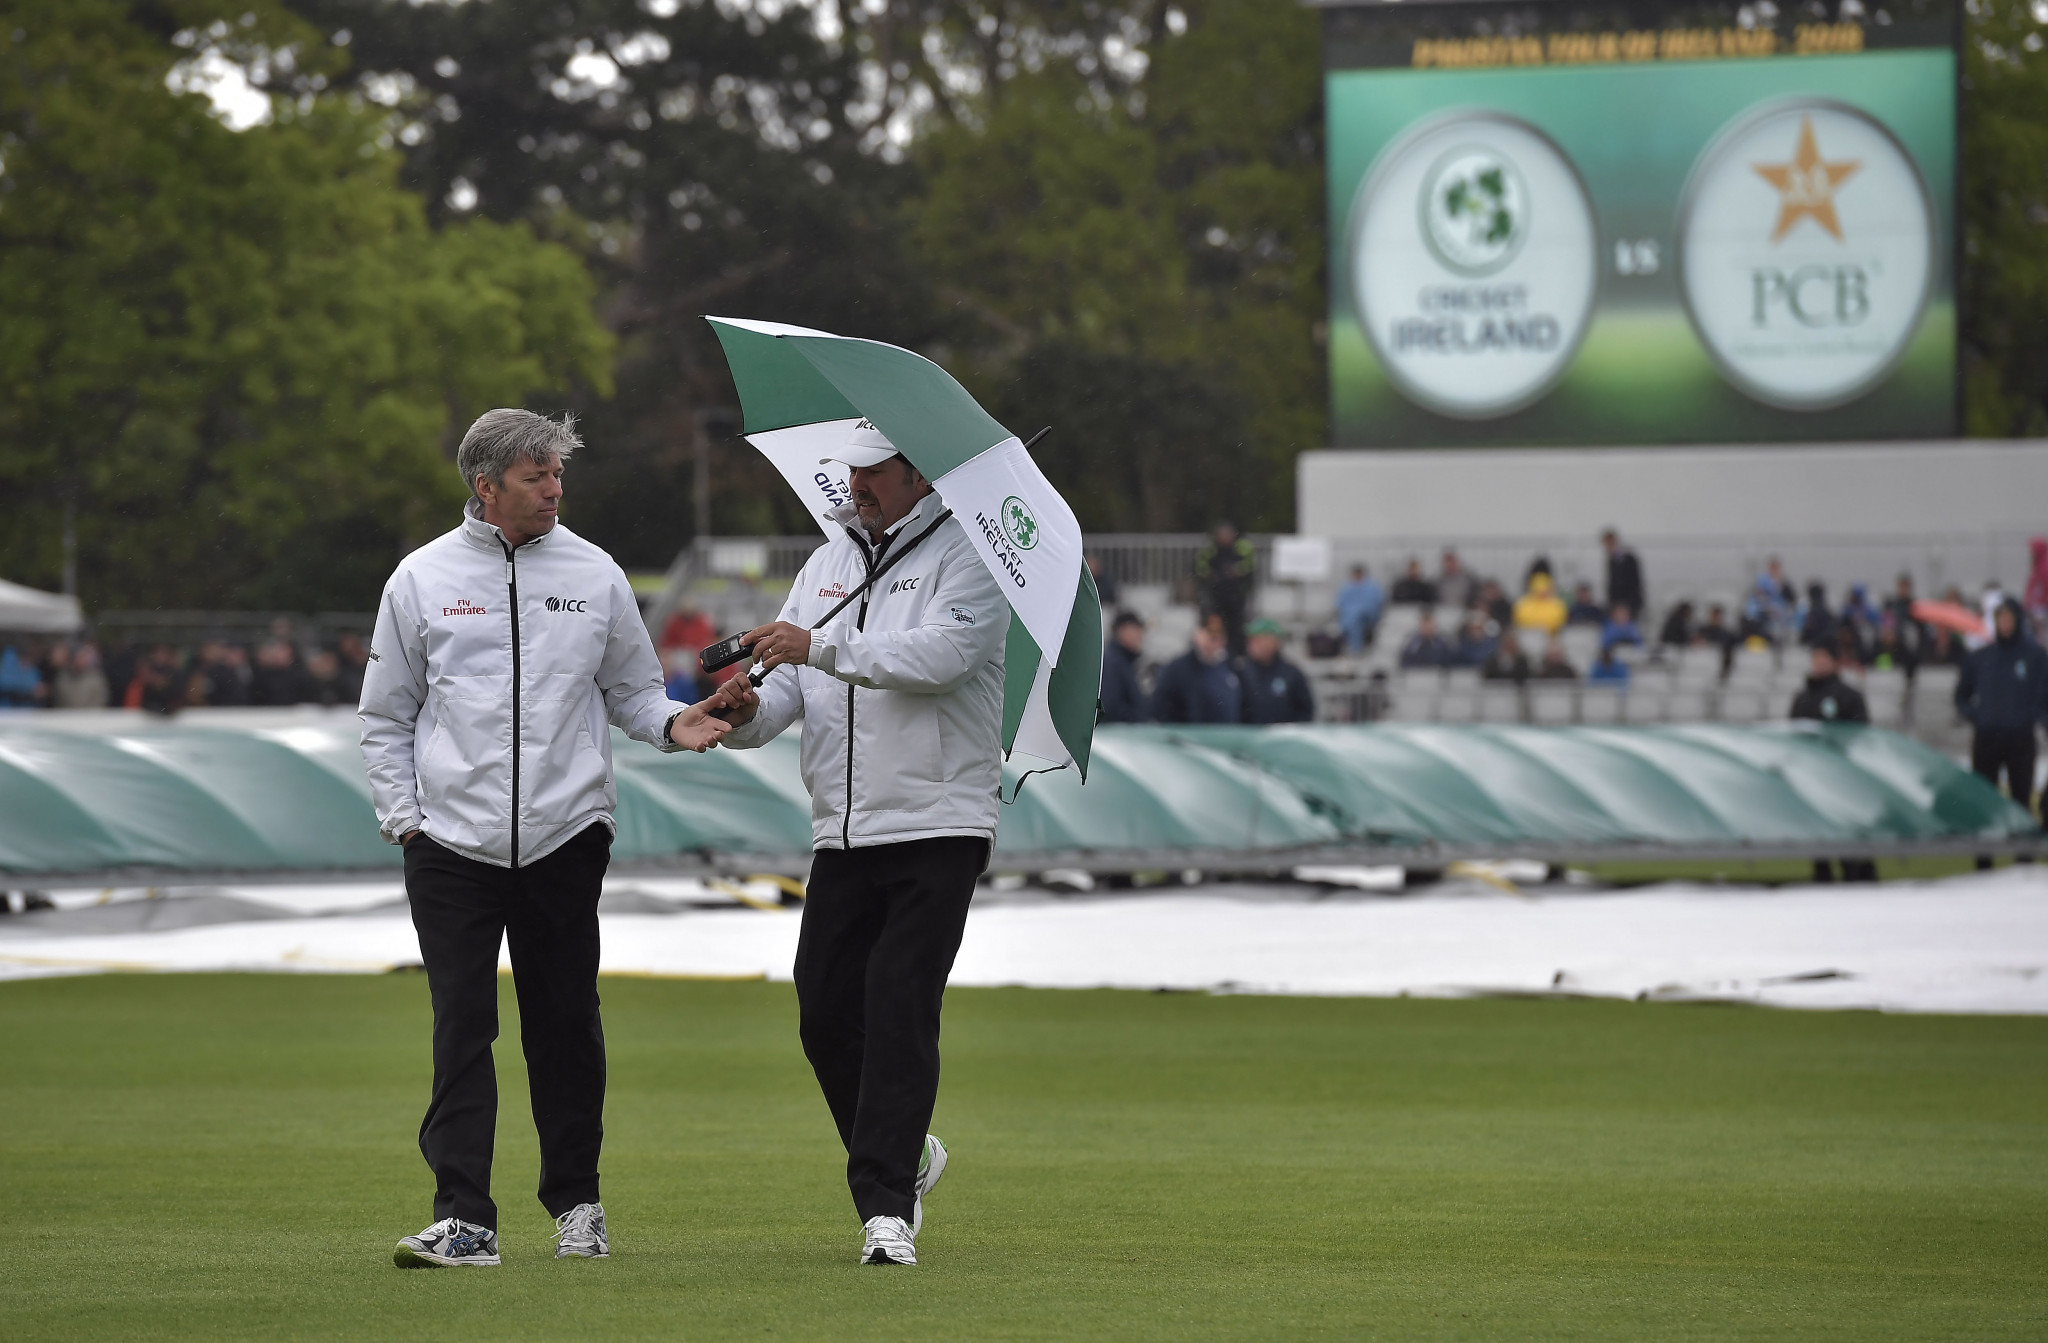 First day of Ireland's inaugural Test match against Pakistan washed out